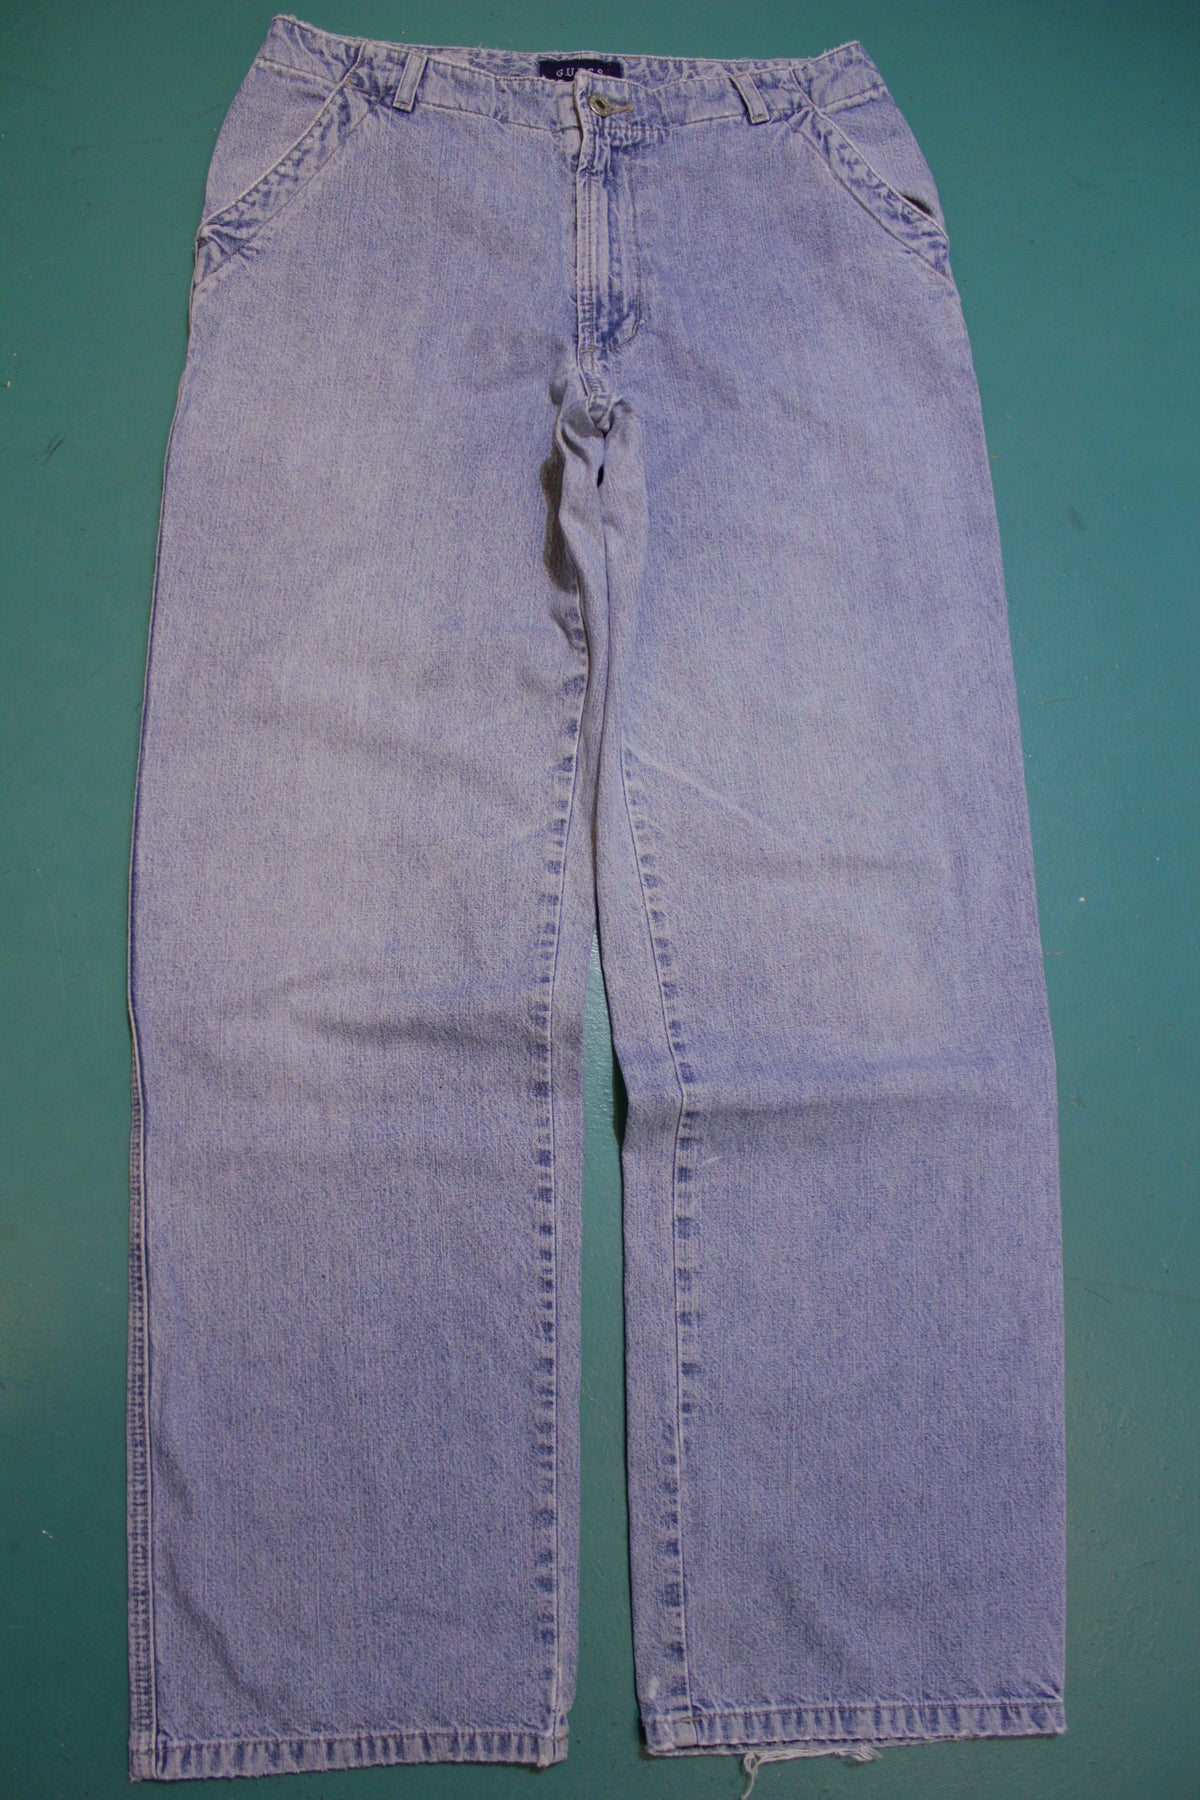 Guess Jeans Original Designs 1981 Vintage 80's Stone Washed Jeans Made in USA